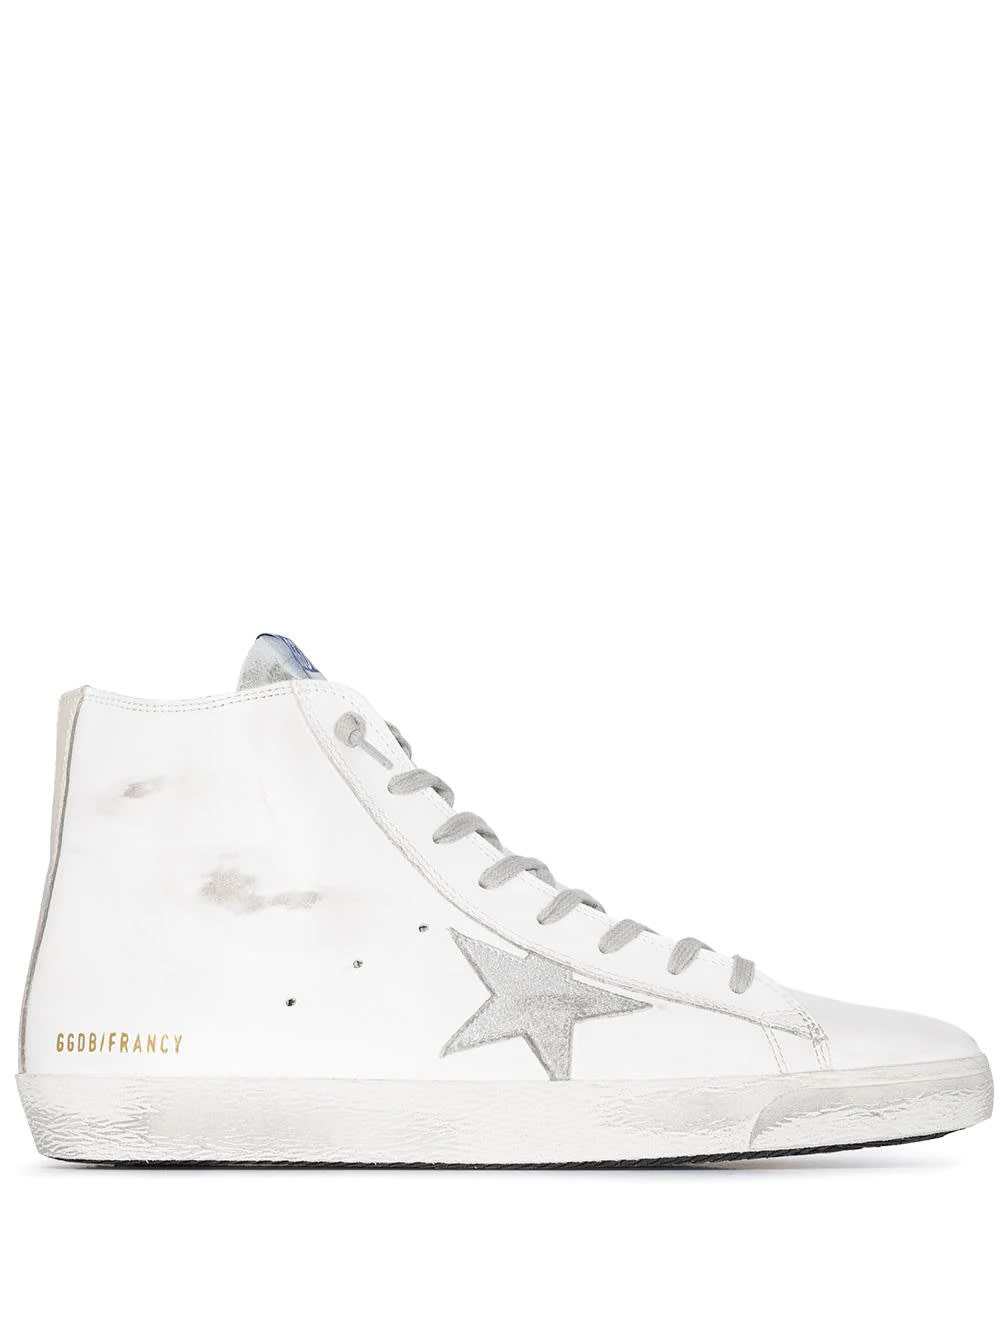 Golden Goose Man White Francy Sneakers With Silver Suede Star